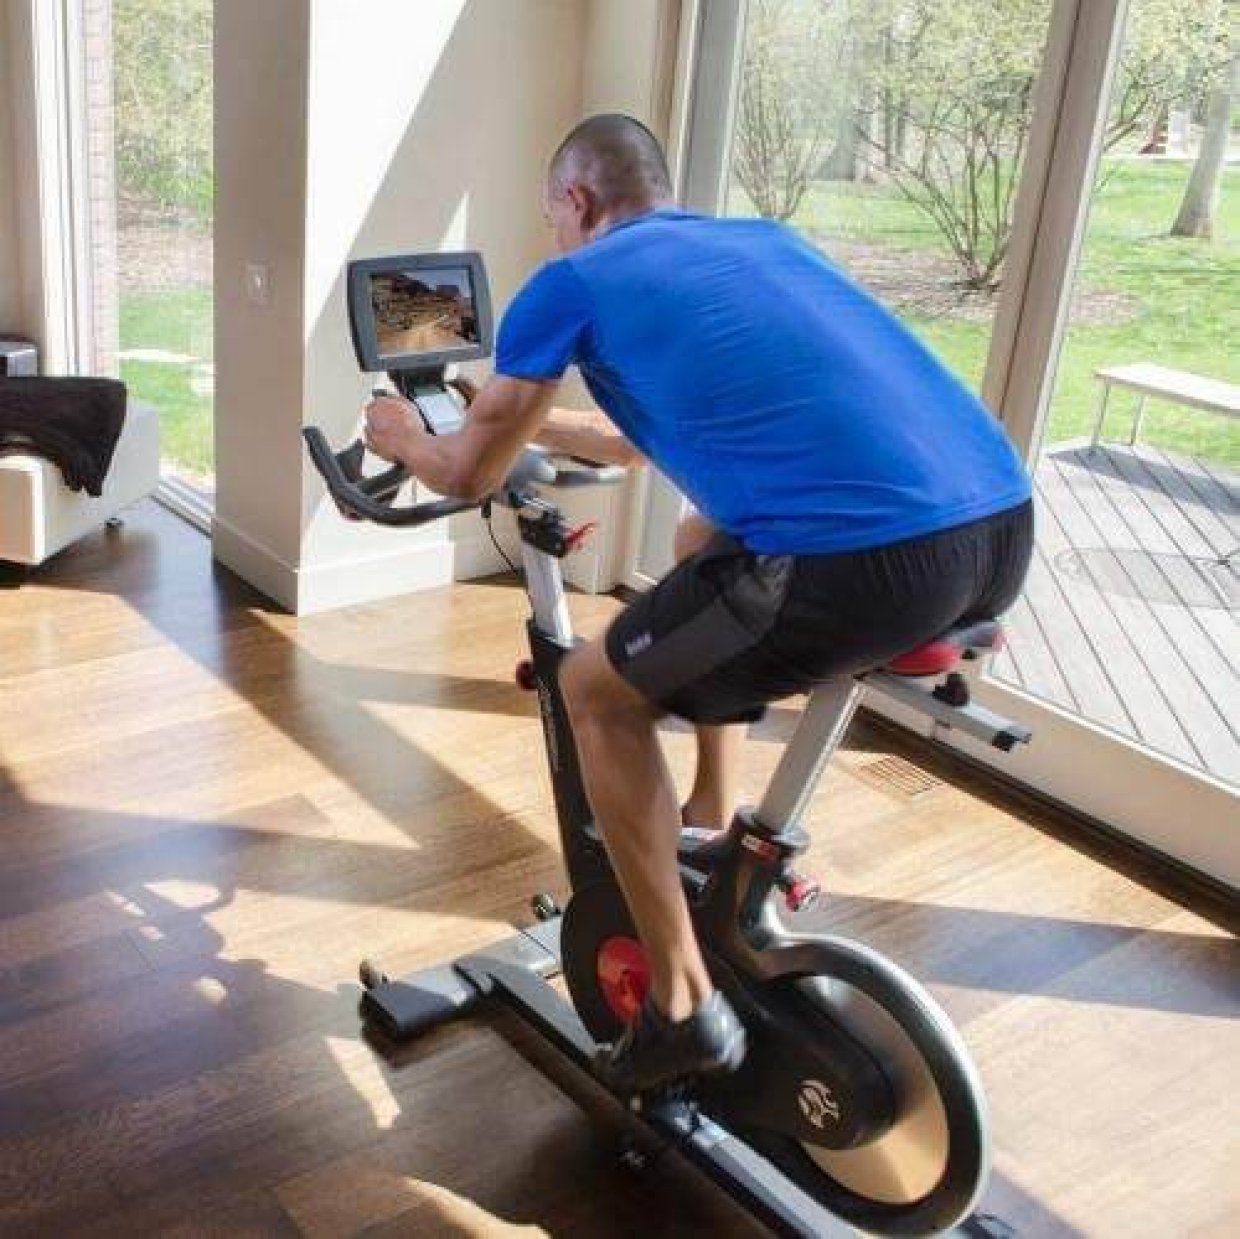 HOW TO CHOOSE THE BEST EXERCISE BIKE FOR YOUR HOME